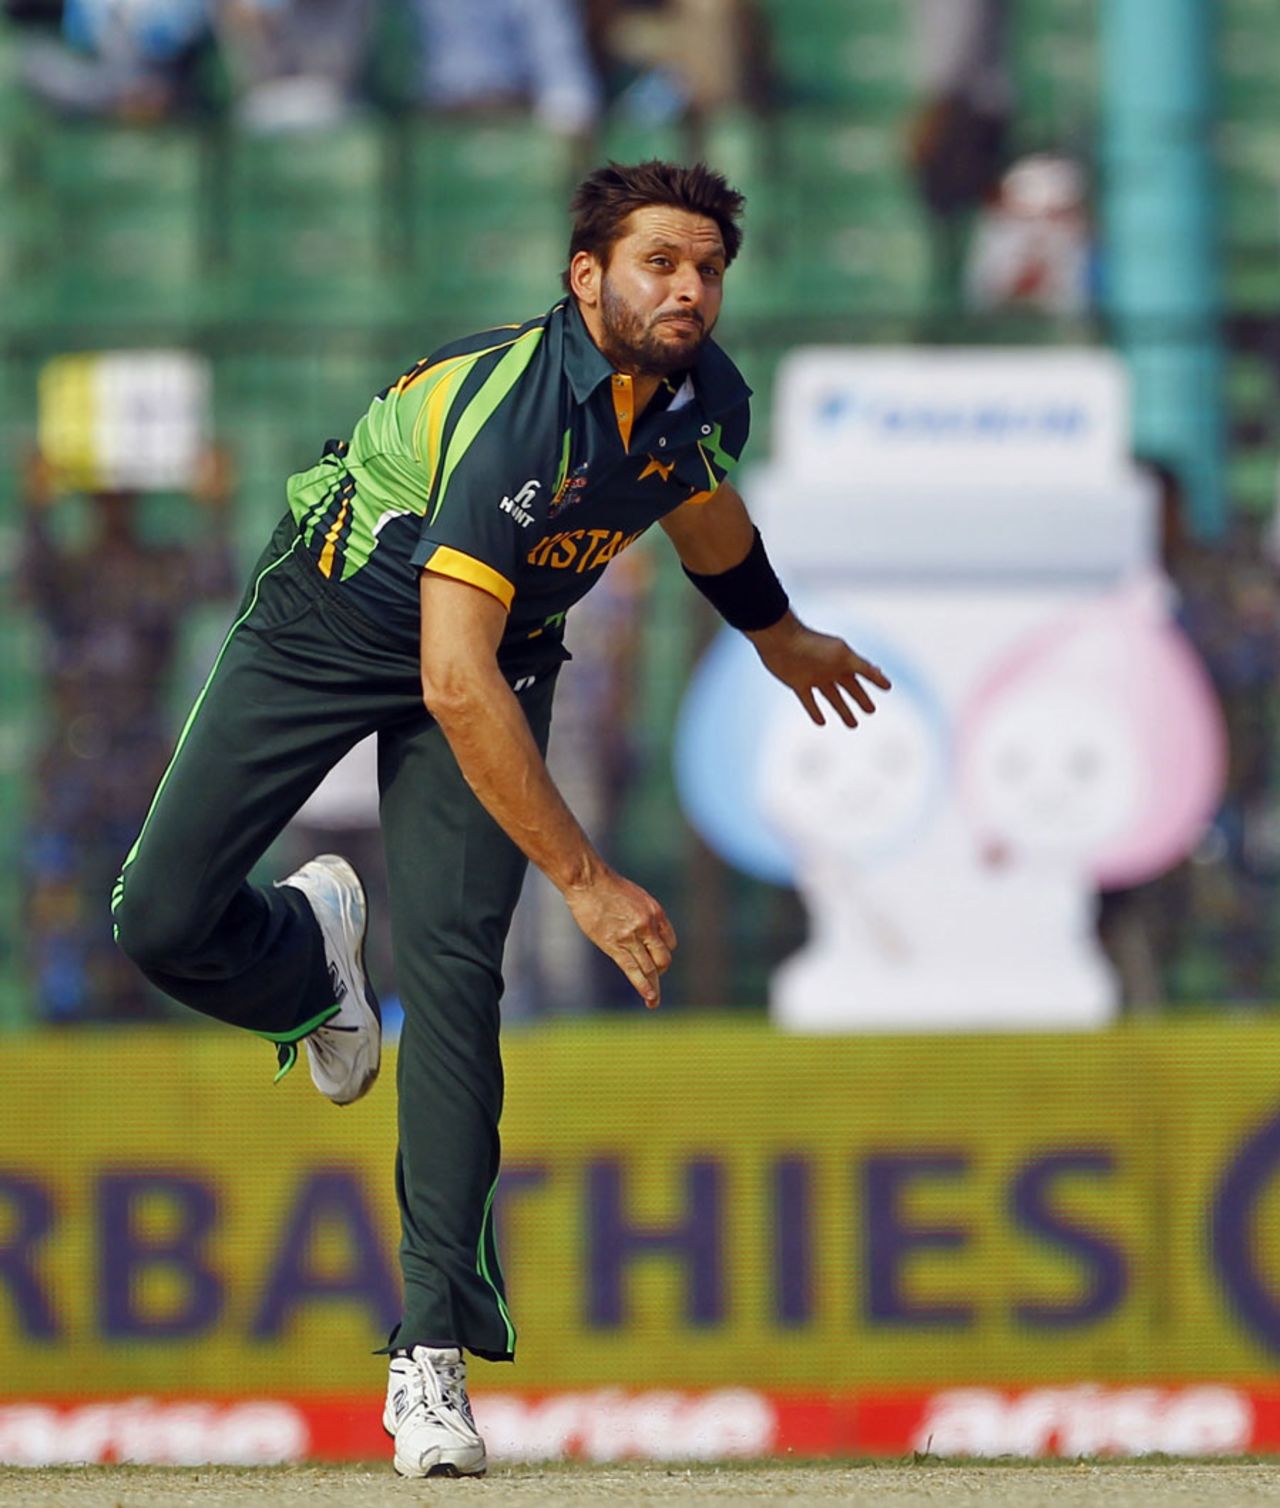 Shahid Afridi in his delivery stride, Pakistan v Sri Lanka, Asia Cup, Fatullah, February 25, 2014